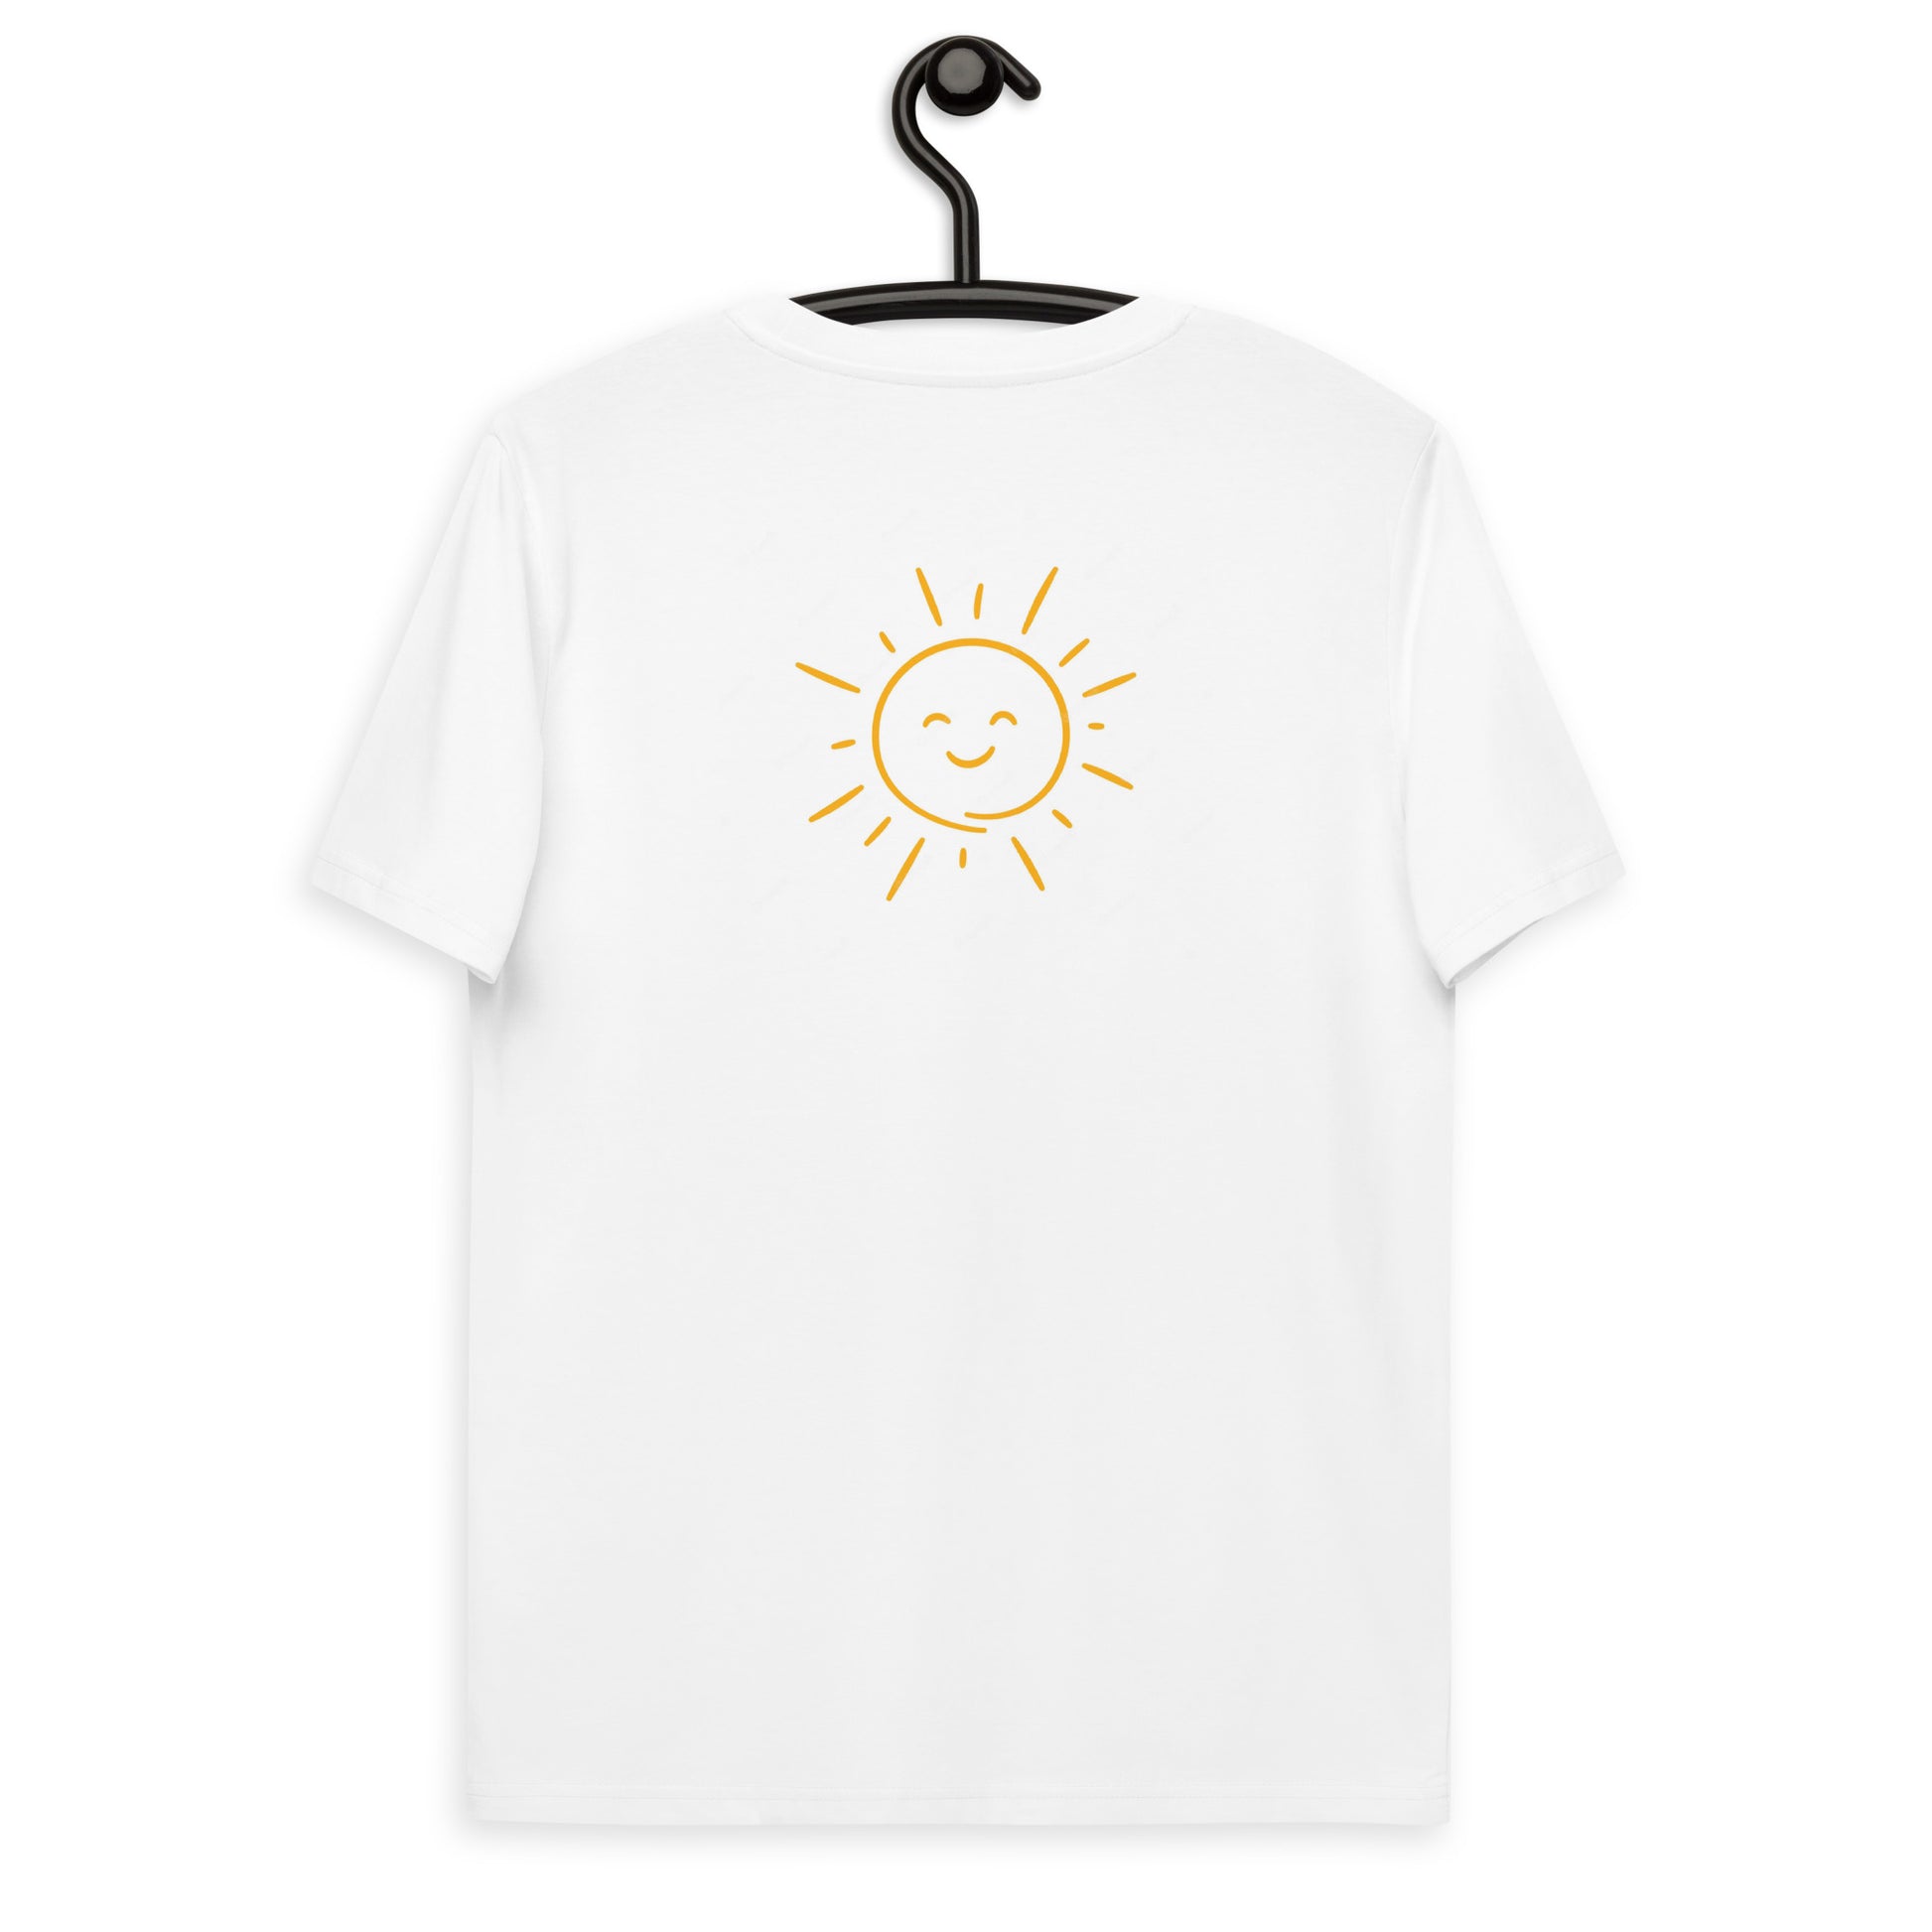 "Be the sunshine" Embroidered Organic Cotton T-Shirt